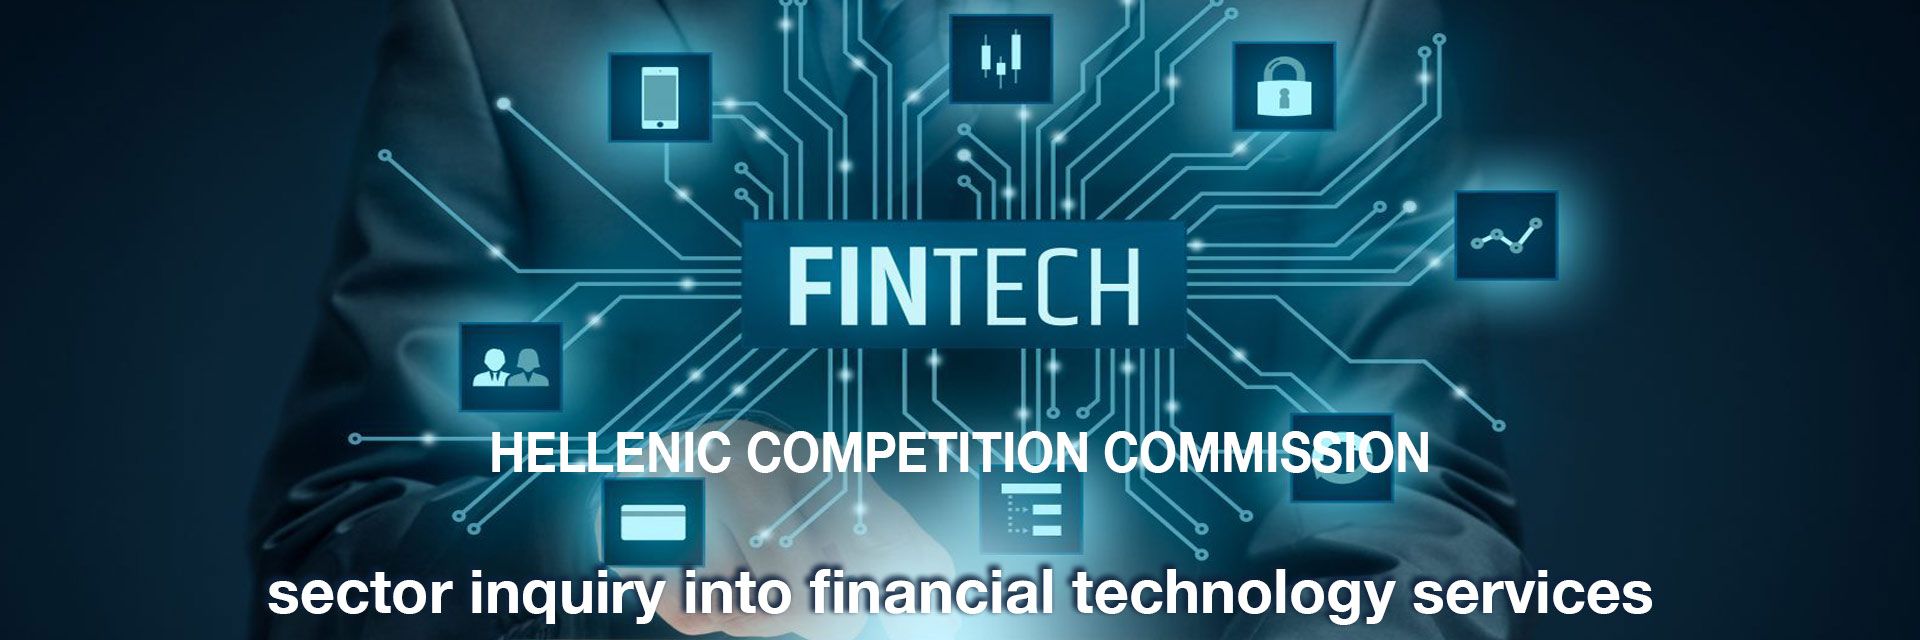 Press Release -  HCC sector inquiry on fintech